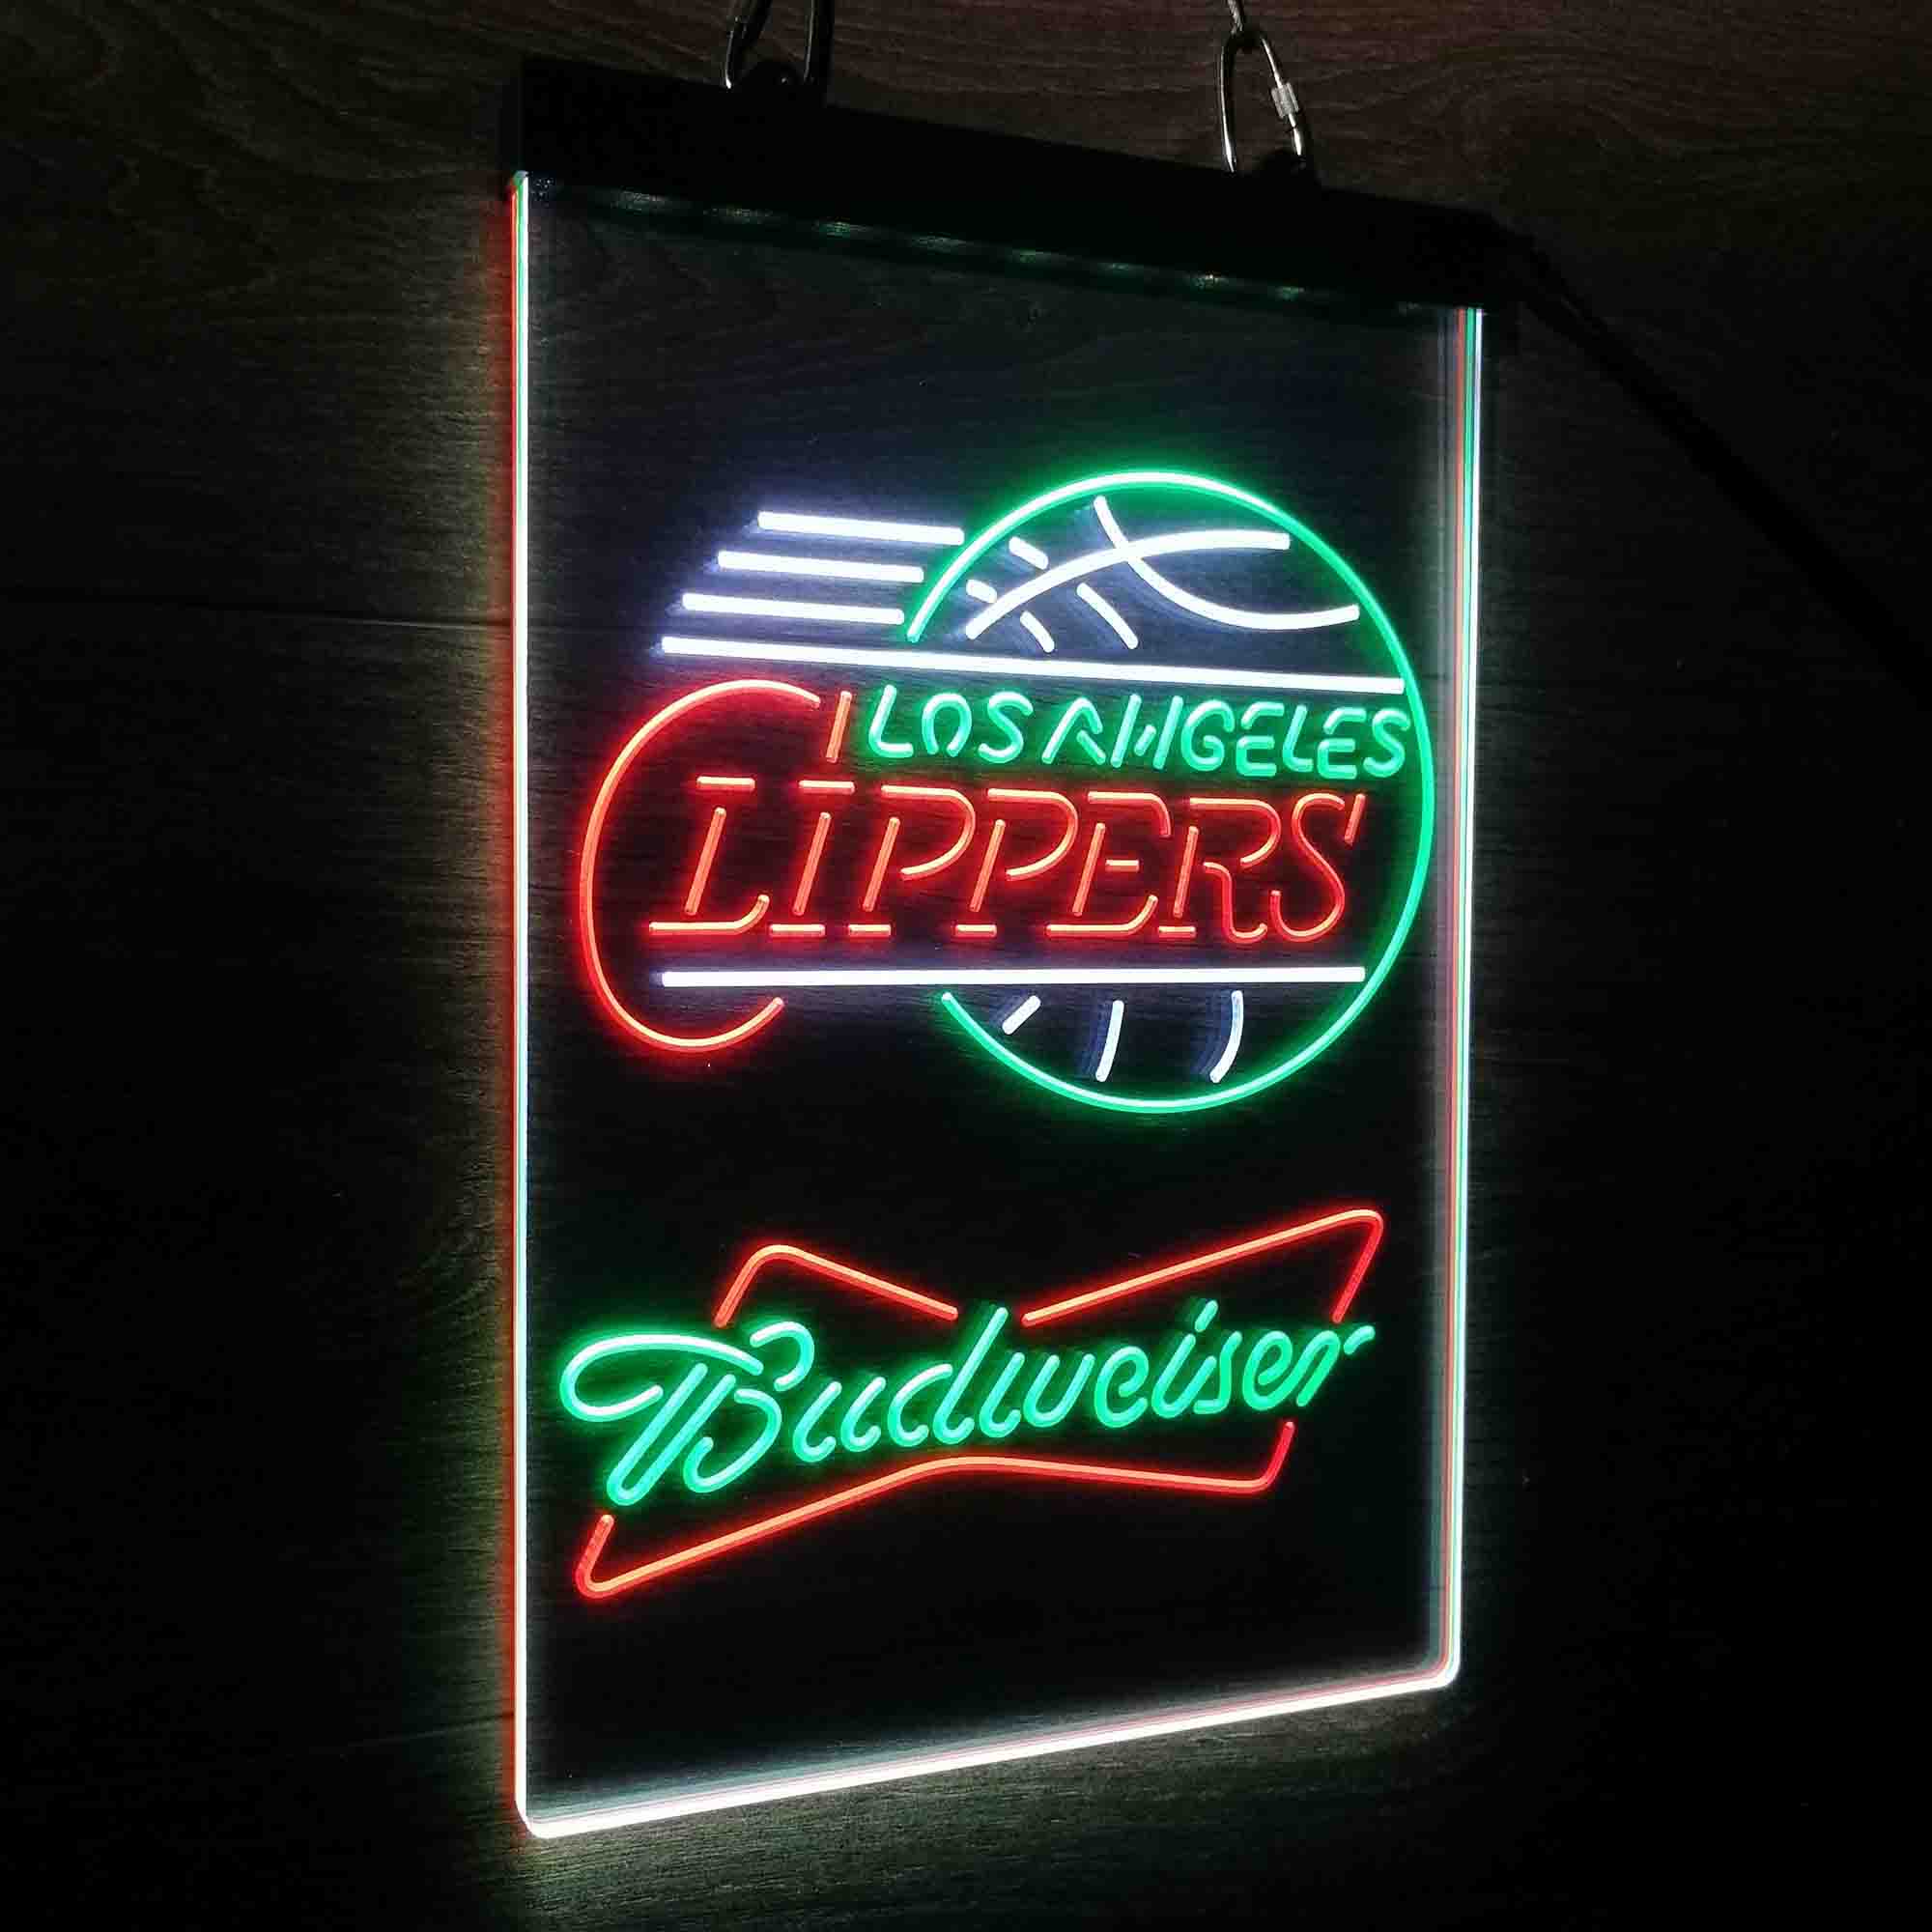 Los Angeles Clippers Nba Budweiser Neon LED Sign 3 Colors